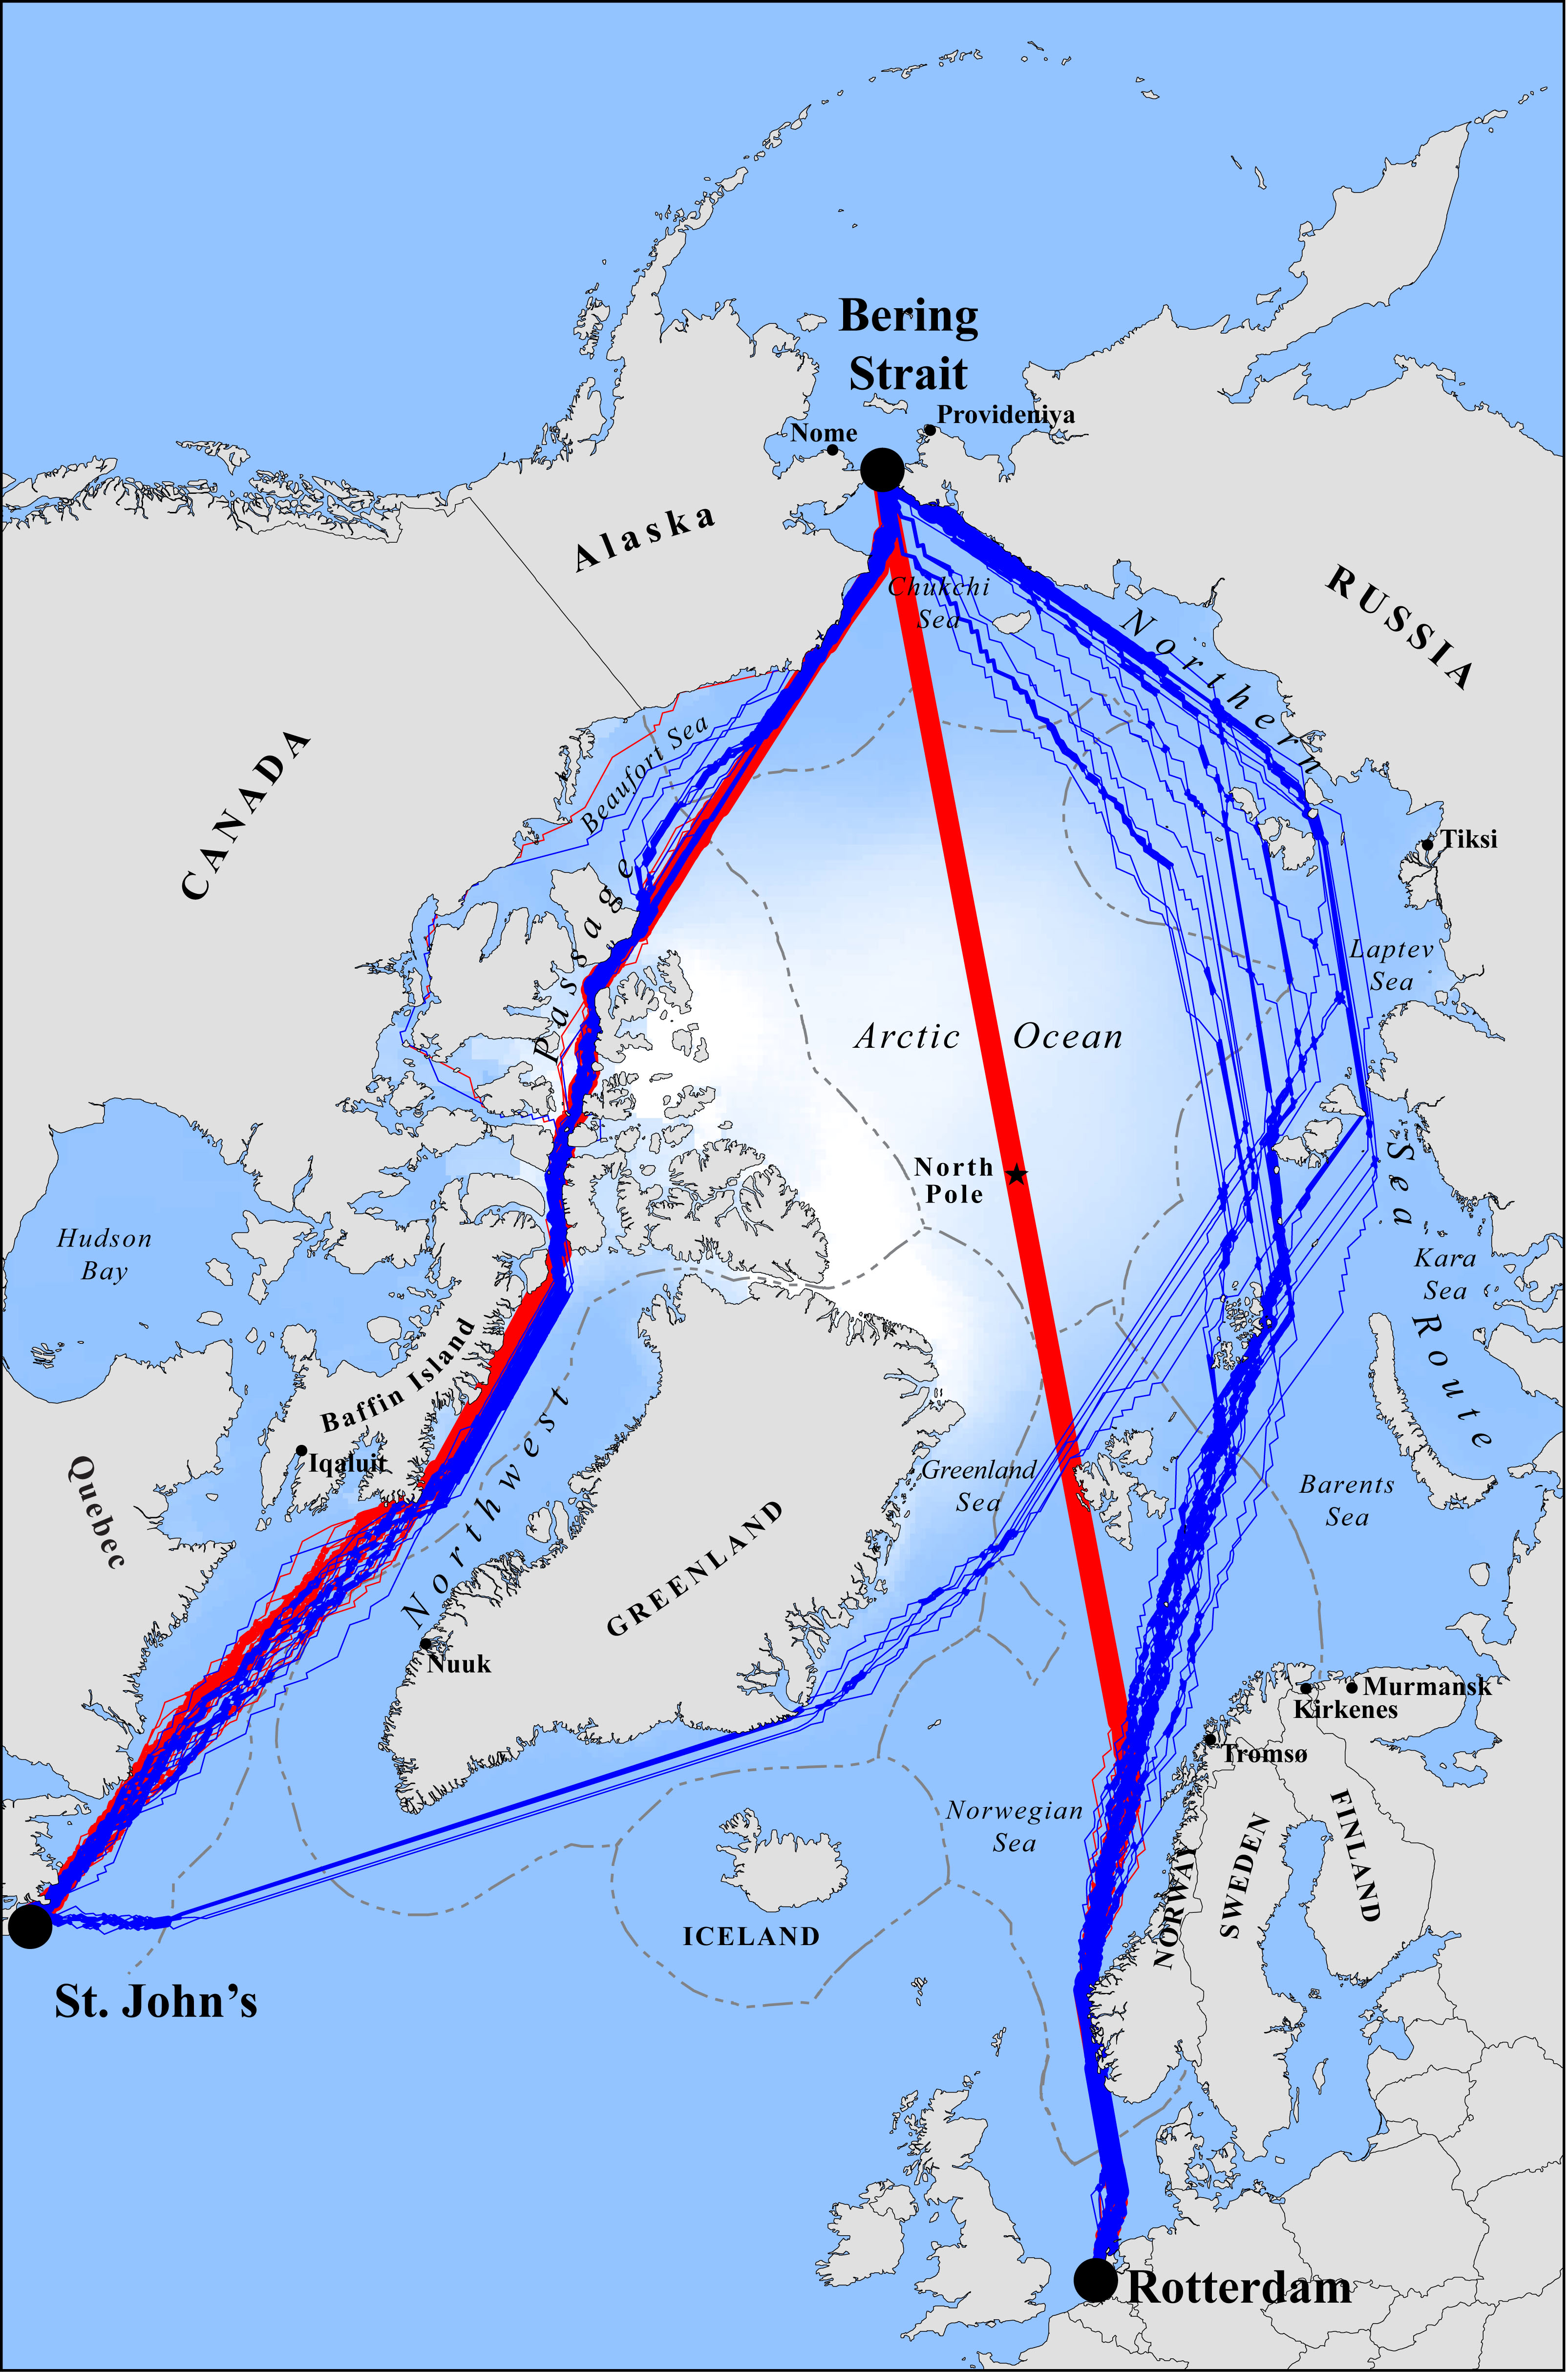 Sailing over North Pole Possible by 2050 due to Global Warming: Study ...